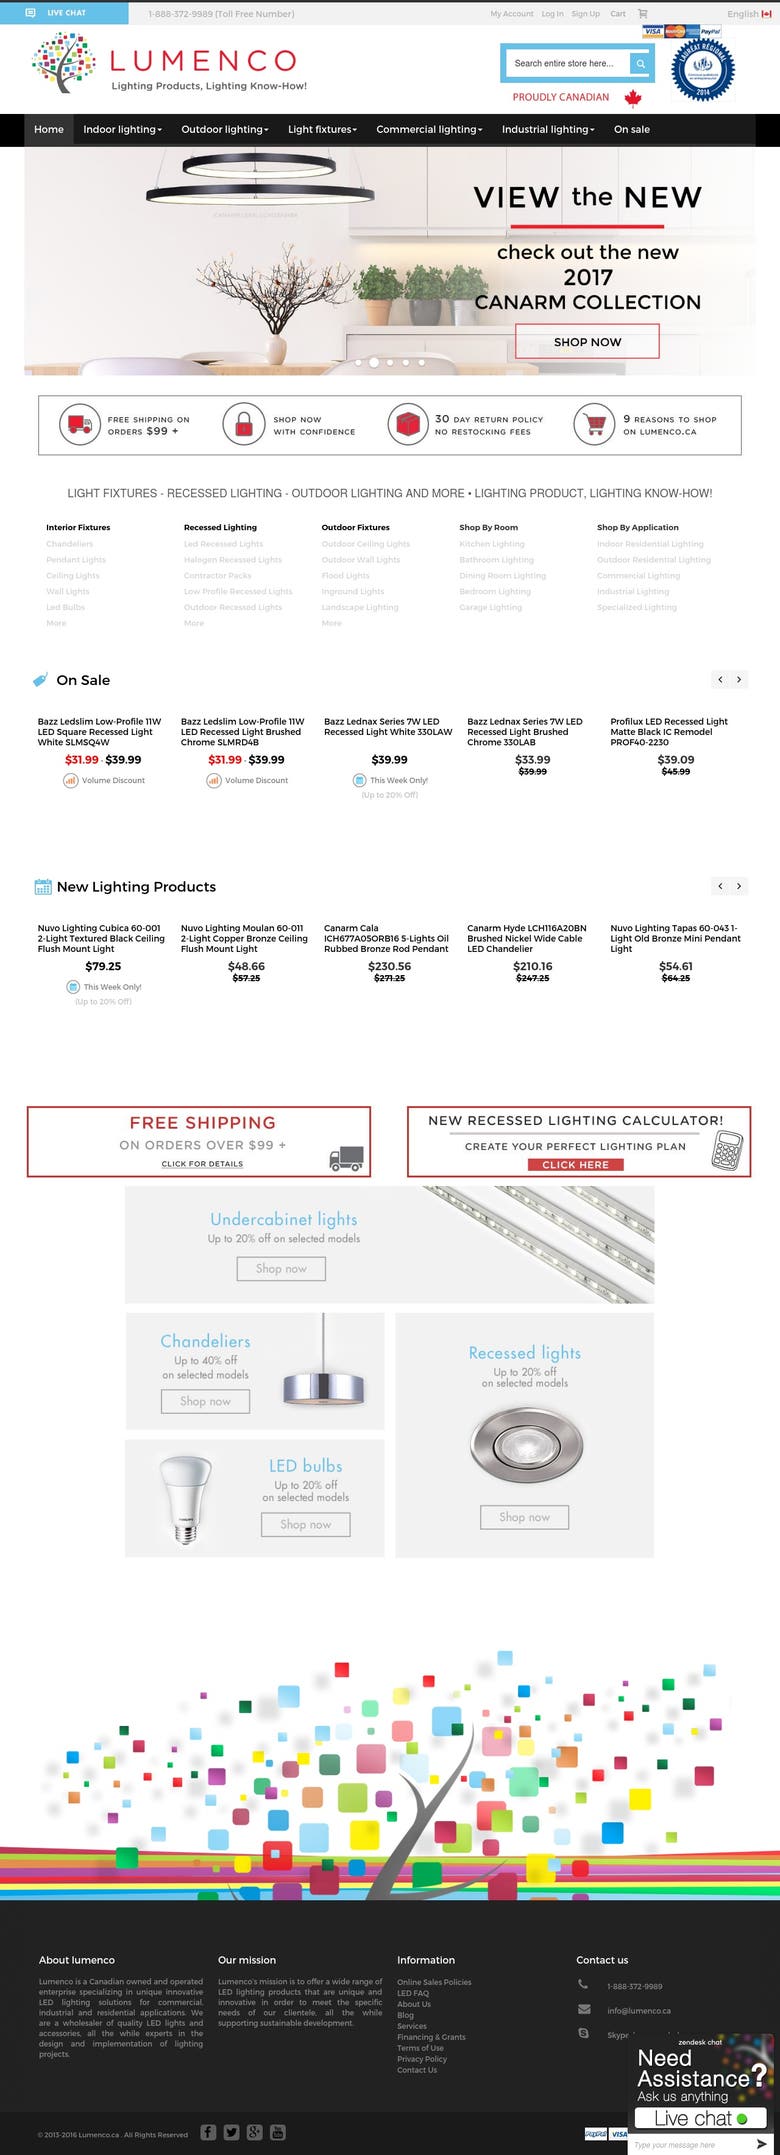 Lumenco.ca - Online store selling Lights and Bulbs